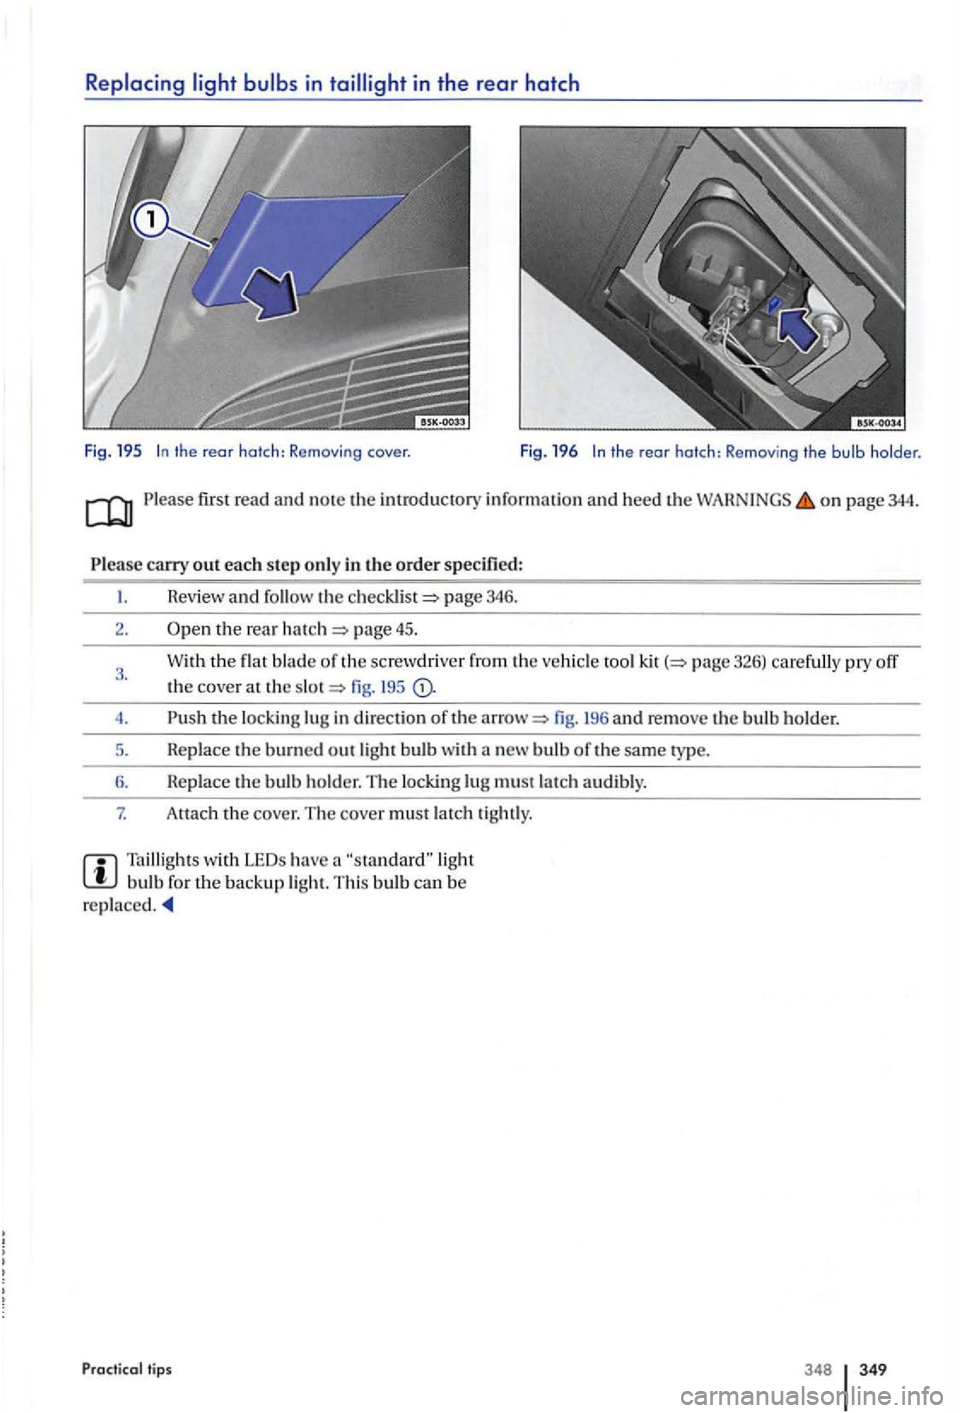 VOLKSWAGEN GOLF PLUS 2007  Owners Manual in th e  rear hatch 
Fig.  195 the rear hatch: Removing the bulb holder. 
first read and  note the introducto ry info rm ation  and  heed the on page 344. 
Revie w and  follow  the page  346. 
2. page